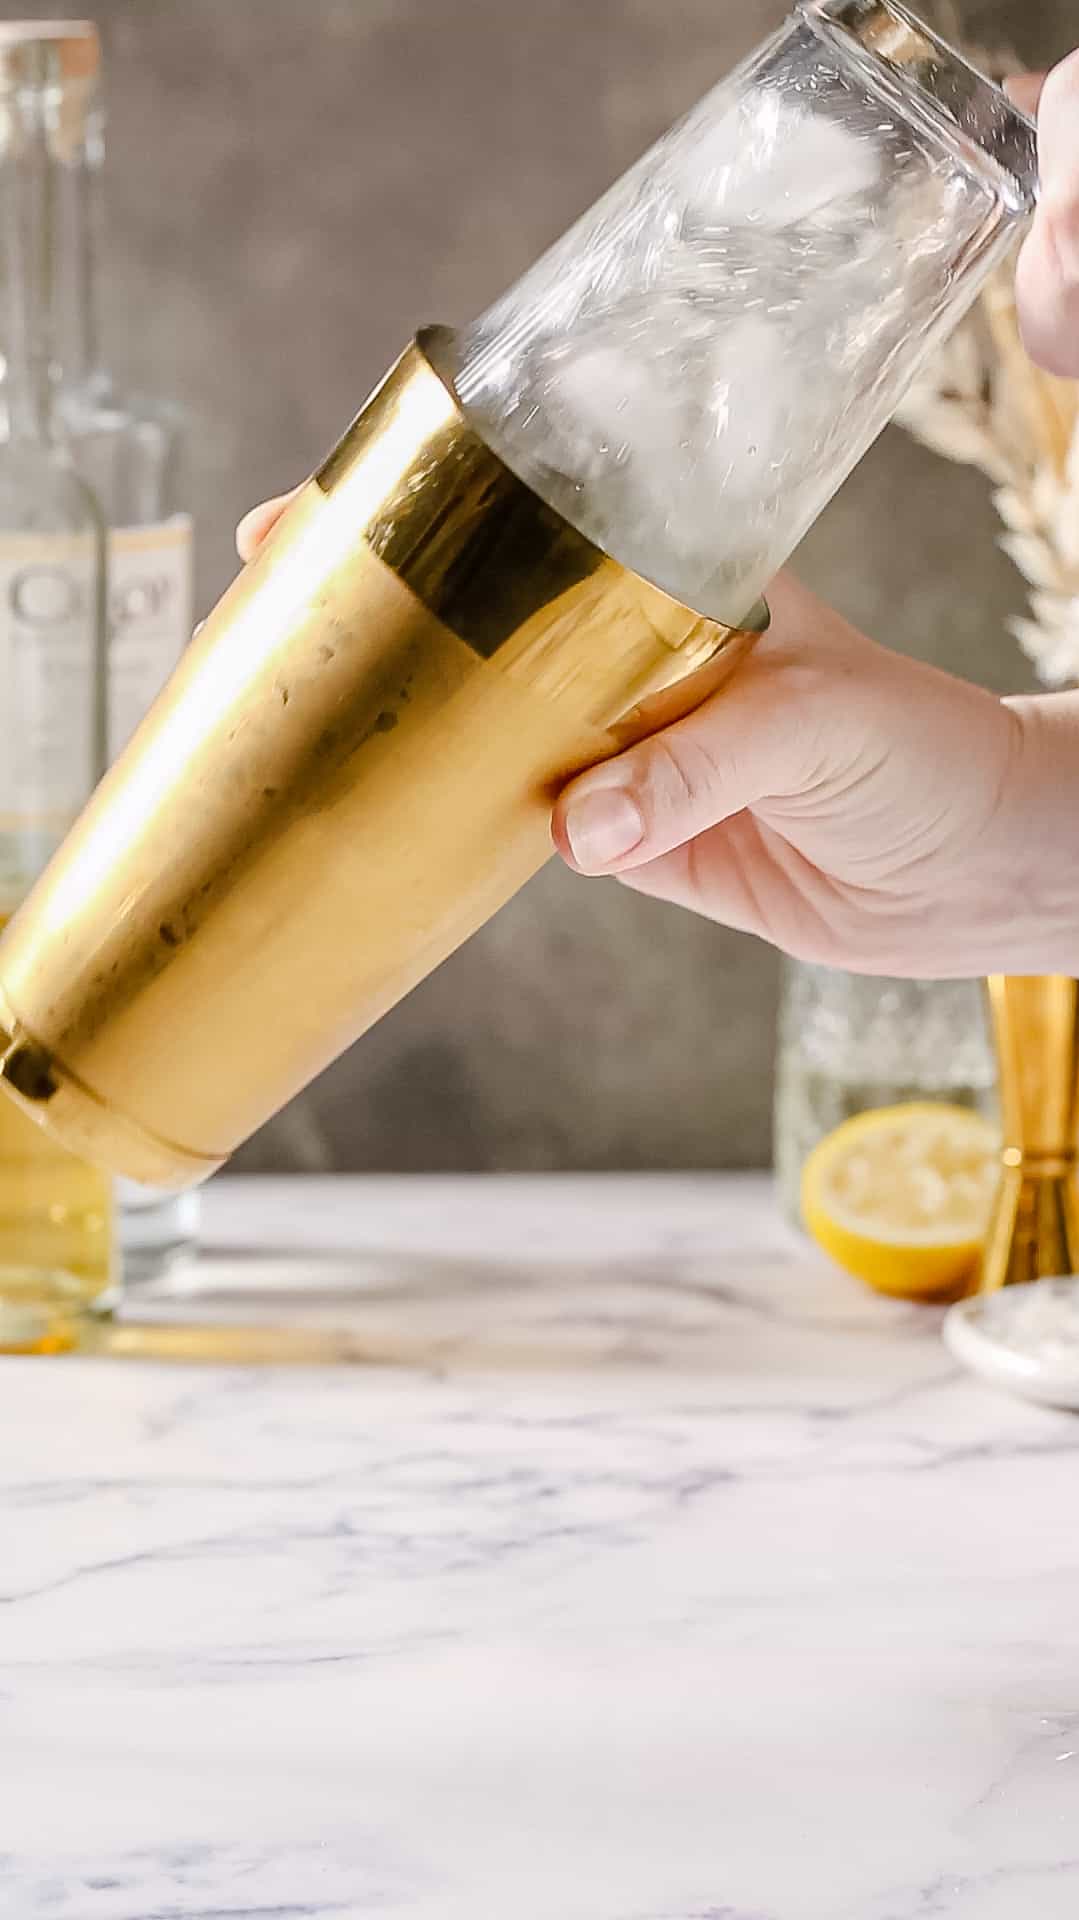 Hands shaking a liquid-filled cocktail shaker that has one gold side and one glass side.